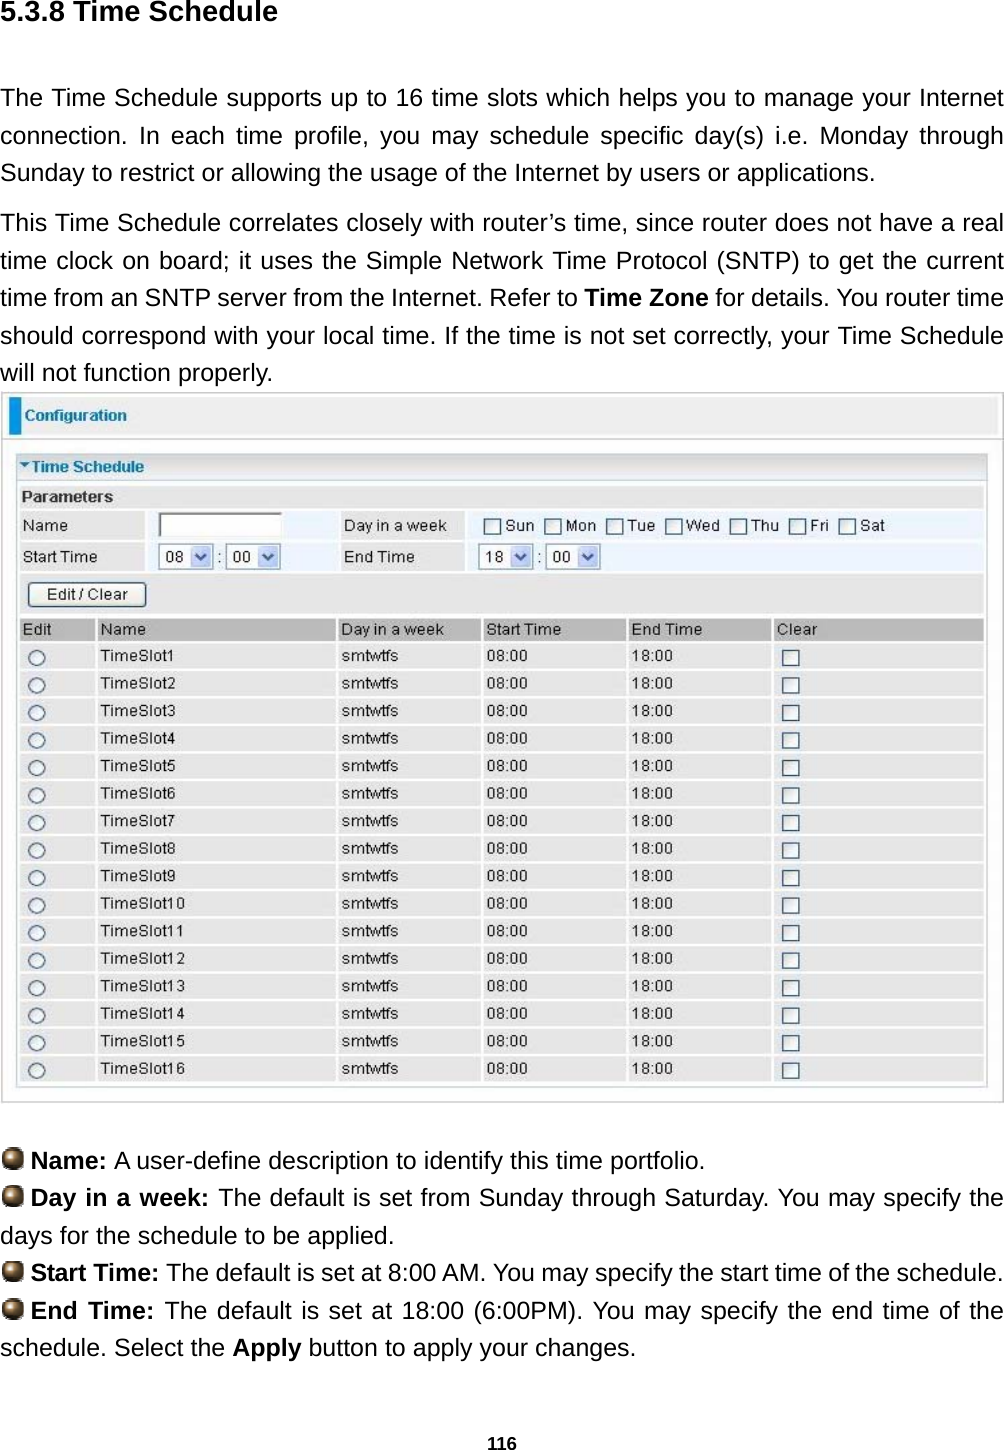 116 5.3.8 Time Schedule The Time Schedule supports up to 16 time slots which helps you to manage your Internet connection. In each time profile, you may schedule specific day(s) i.e. Monday through Sunday to restrict or allowing the usage of the Internet by users or applications.   This Time Schedule correlates closely with router’s time, since router does not have a real time clock on board; it uses the Simple Network Time Protocol (SNTP) to get the current time from an SNTP server from the Internet. Refer to Time Zone for details. You router time should correspond with your local time. If the time is not set correctly, your Time Schedule will not function properly.    Name: A user-define description to identify this time portfolio.  Day in a week: The default is set from Sunday through Saturday. You may specify the days for the schedule to be applied.  Start Time: The default is set at 8:00 AM. You may specify the start time of the schedule.  End Time: The default is set at 18:00 (6:00PM). You may specify the end time of the schedule. Select the Apply button to apply your changes. 